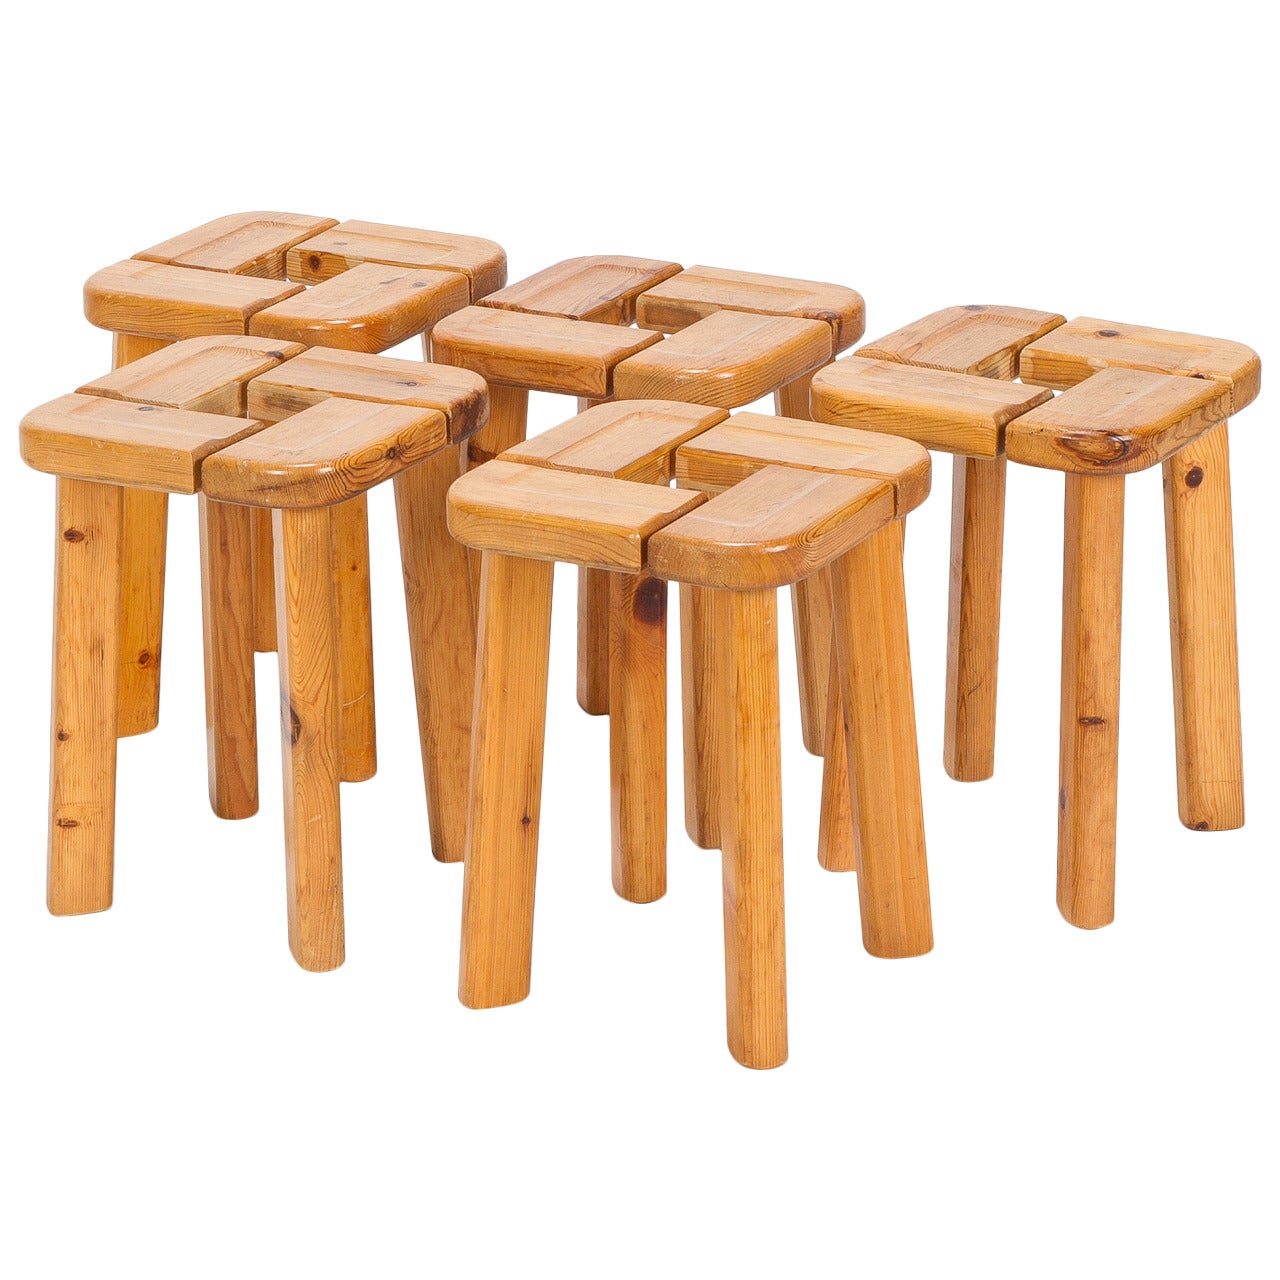 Five Scandinavian Pine Stools in the Style of Lisa Johansson-Pape, 1950s